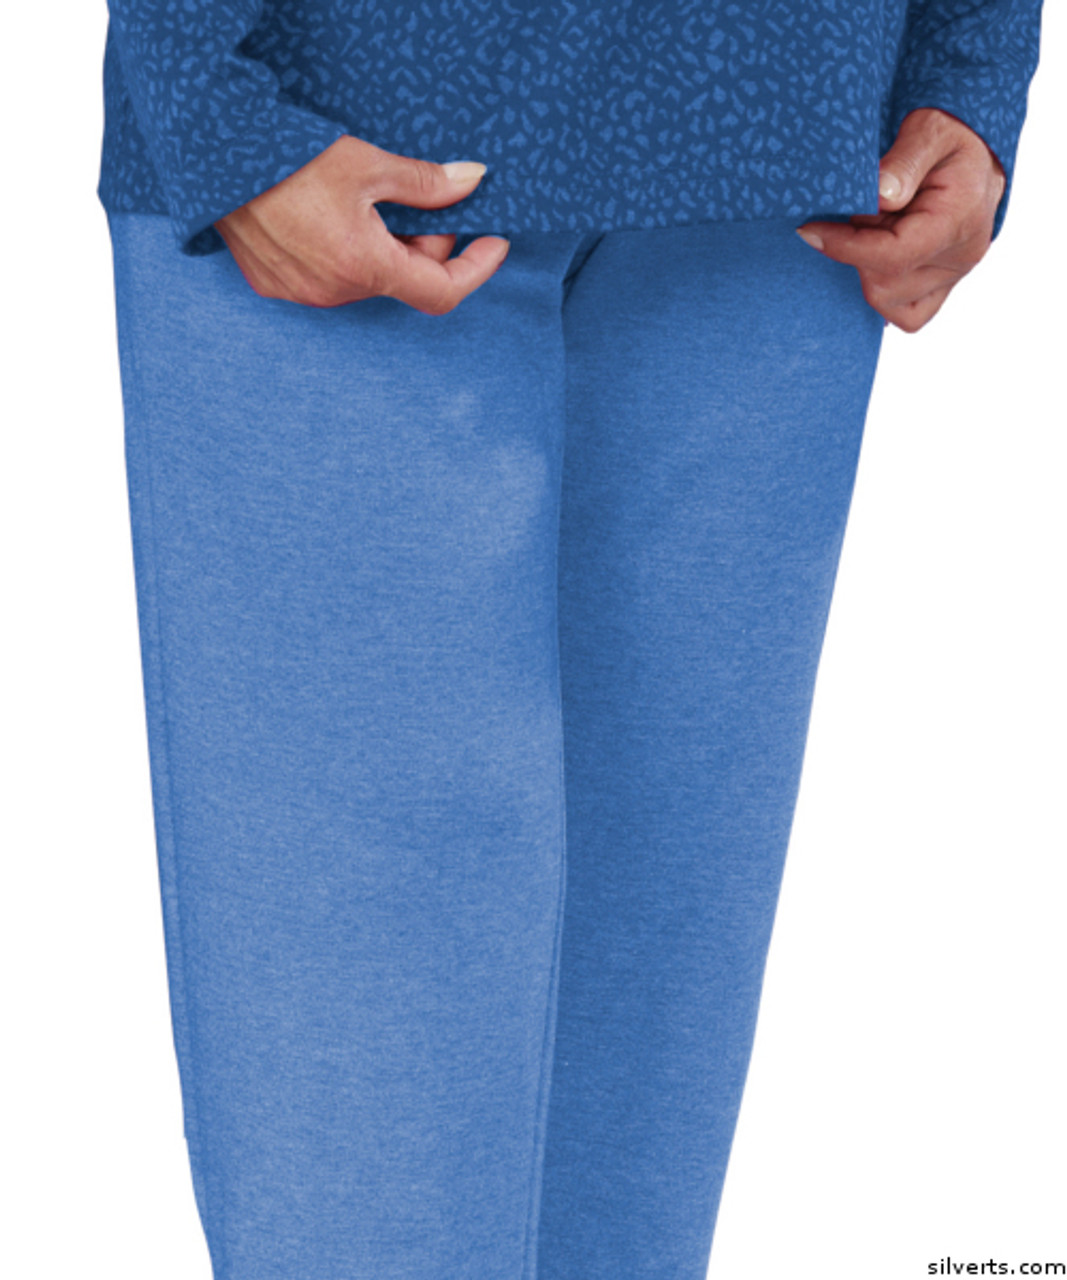 Silvert's 231100403 Womens Soft Knit Adaptive Wheelchair Users Pant , Size Large, ROYAL